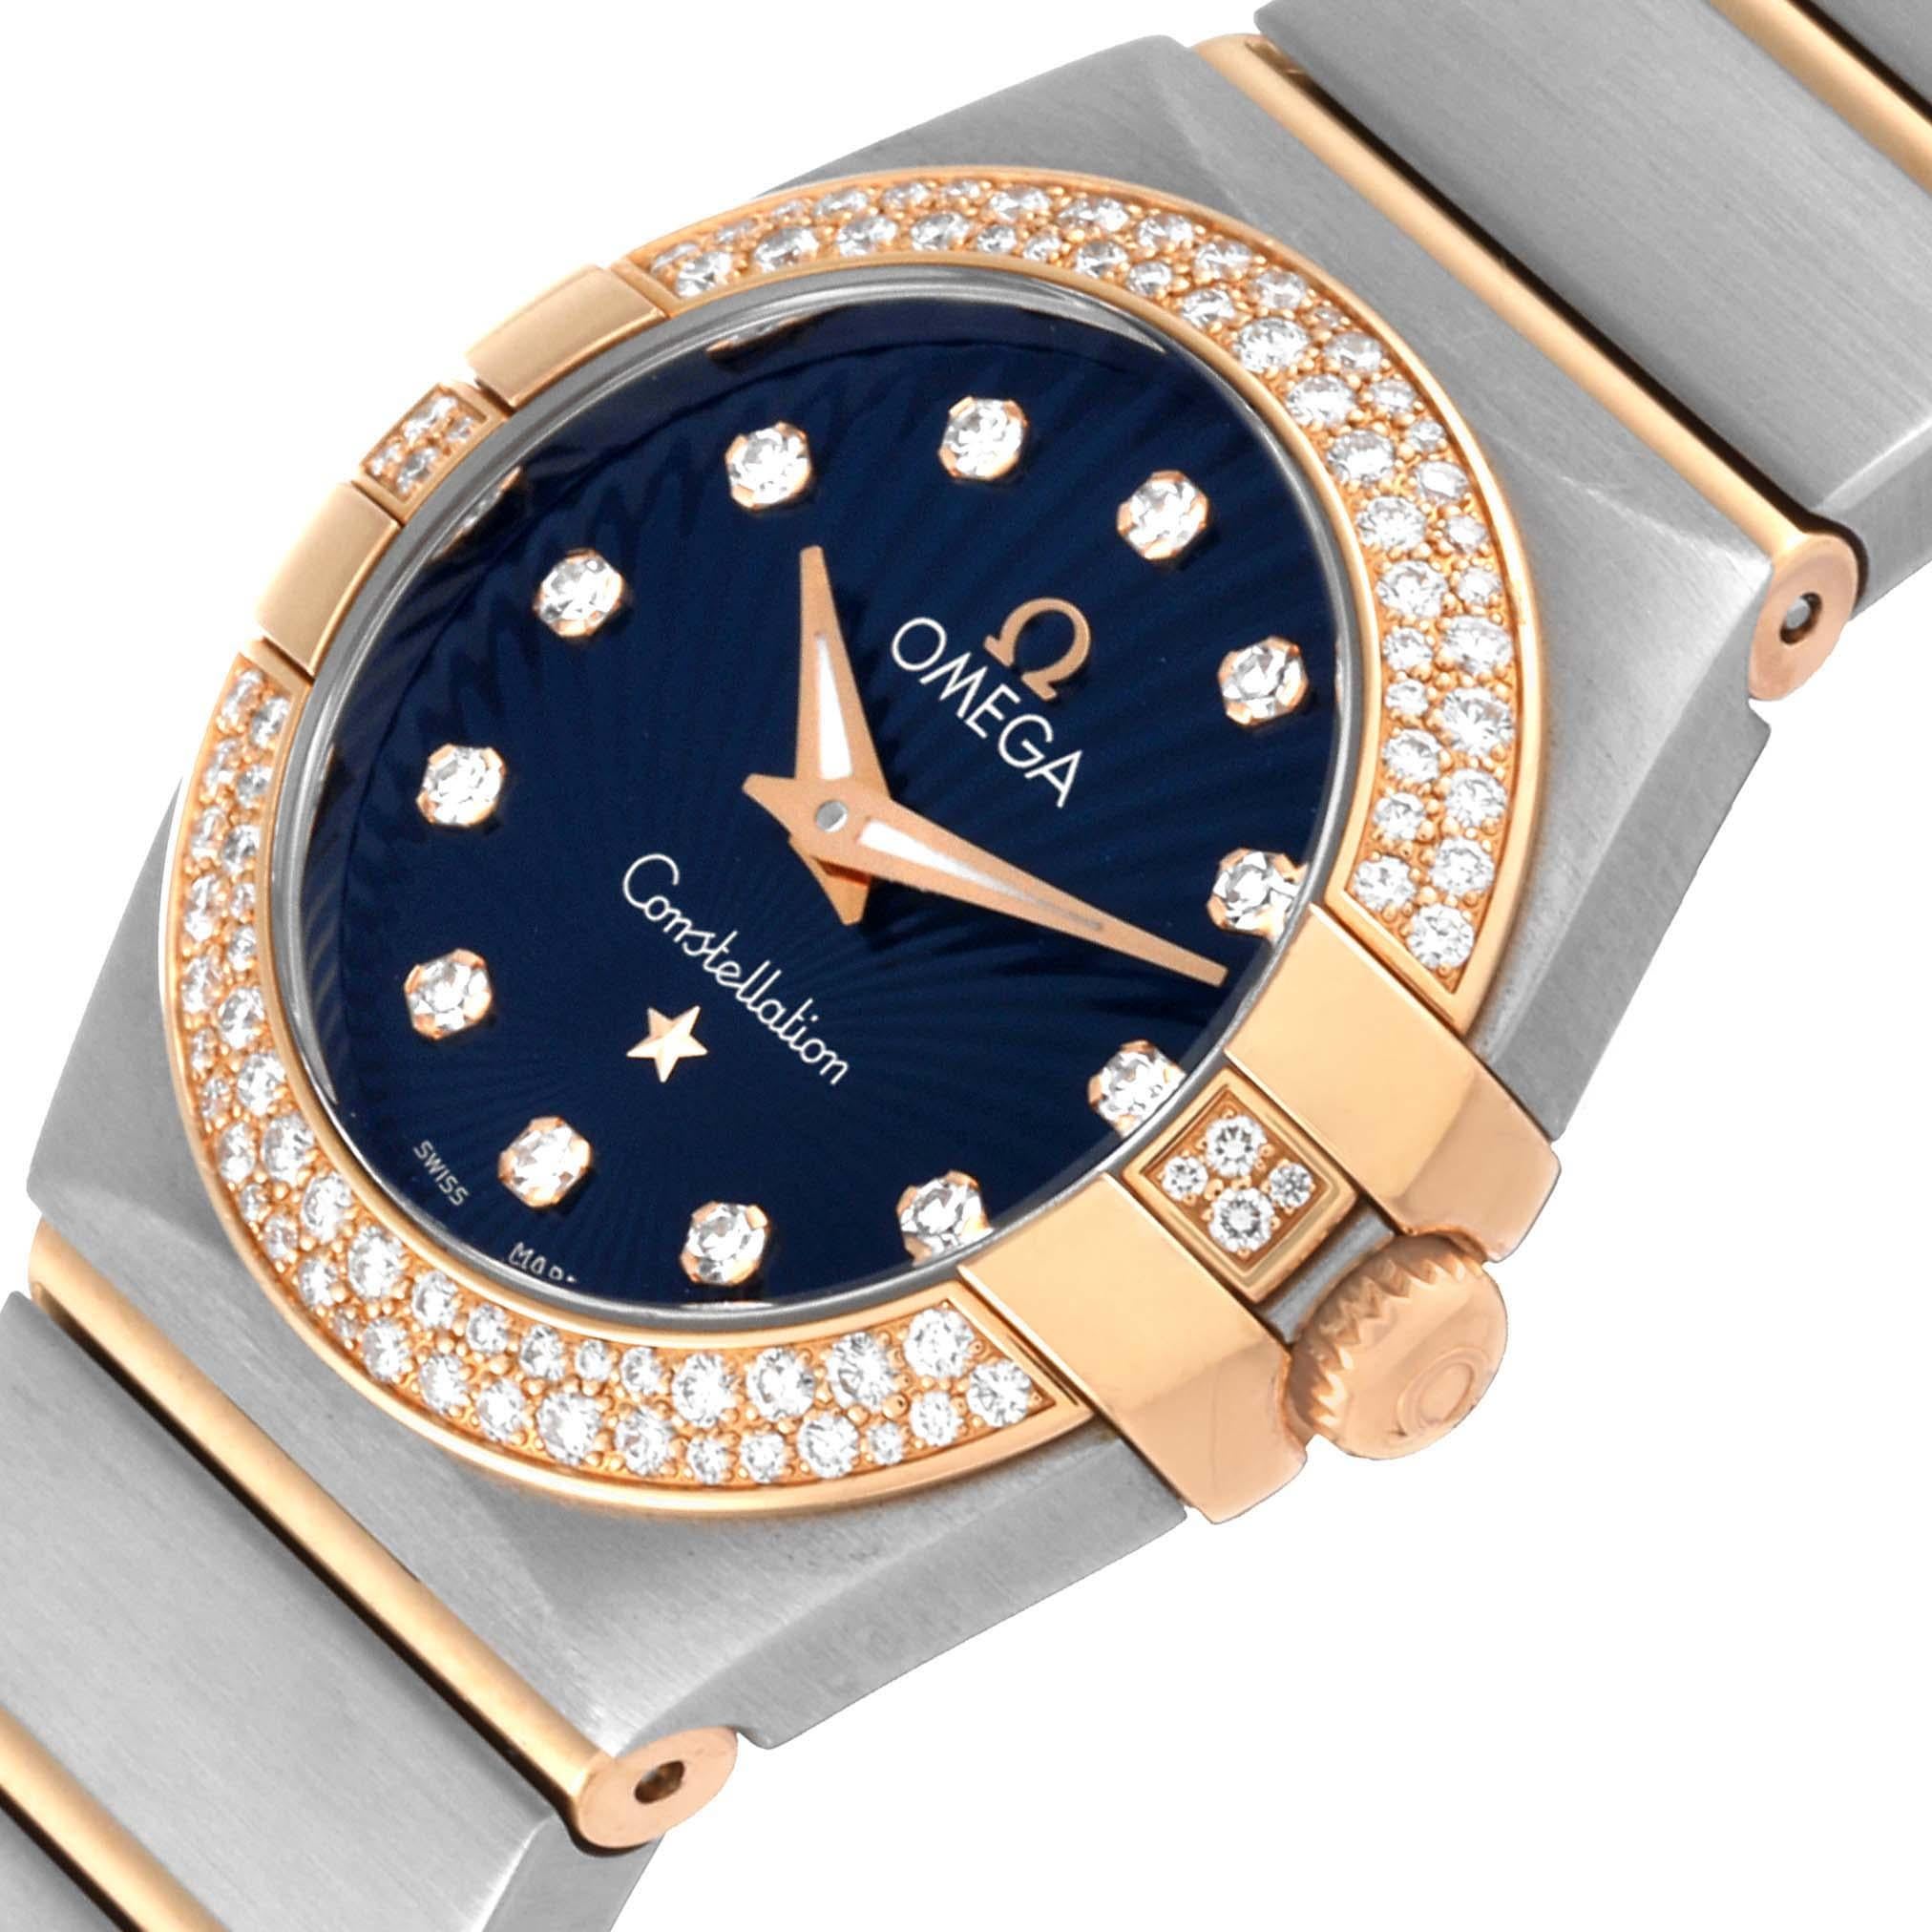 Omega Constellation Steel Rose Gold Diamond Ladies Watch 123.25.24.60.53.001 For Sale 1